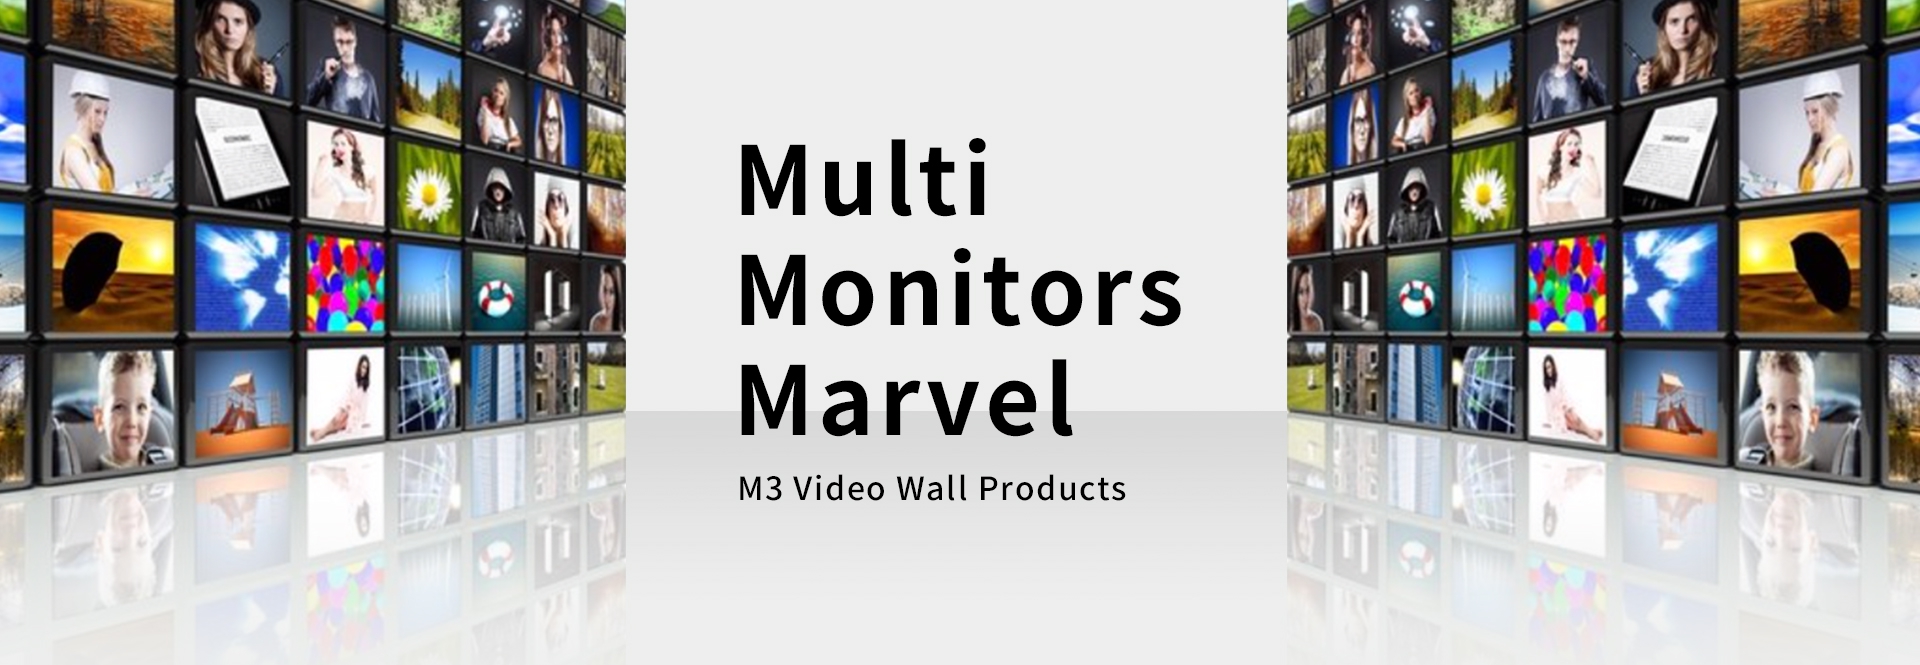 Video Wall Product